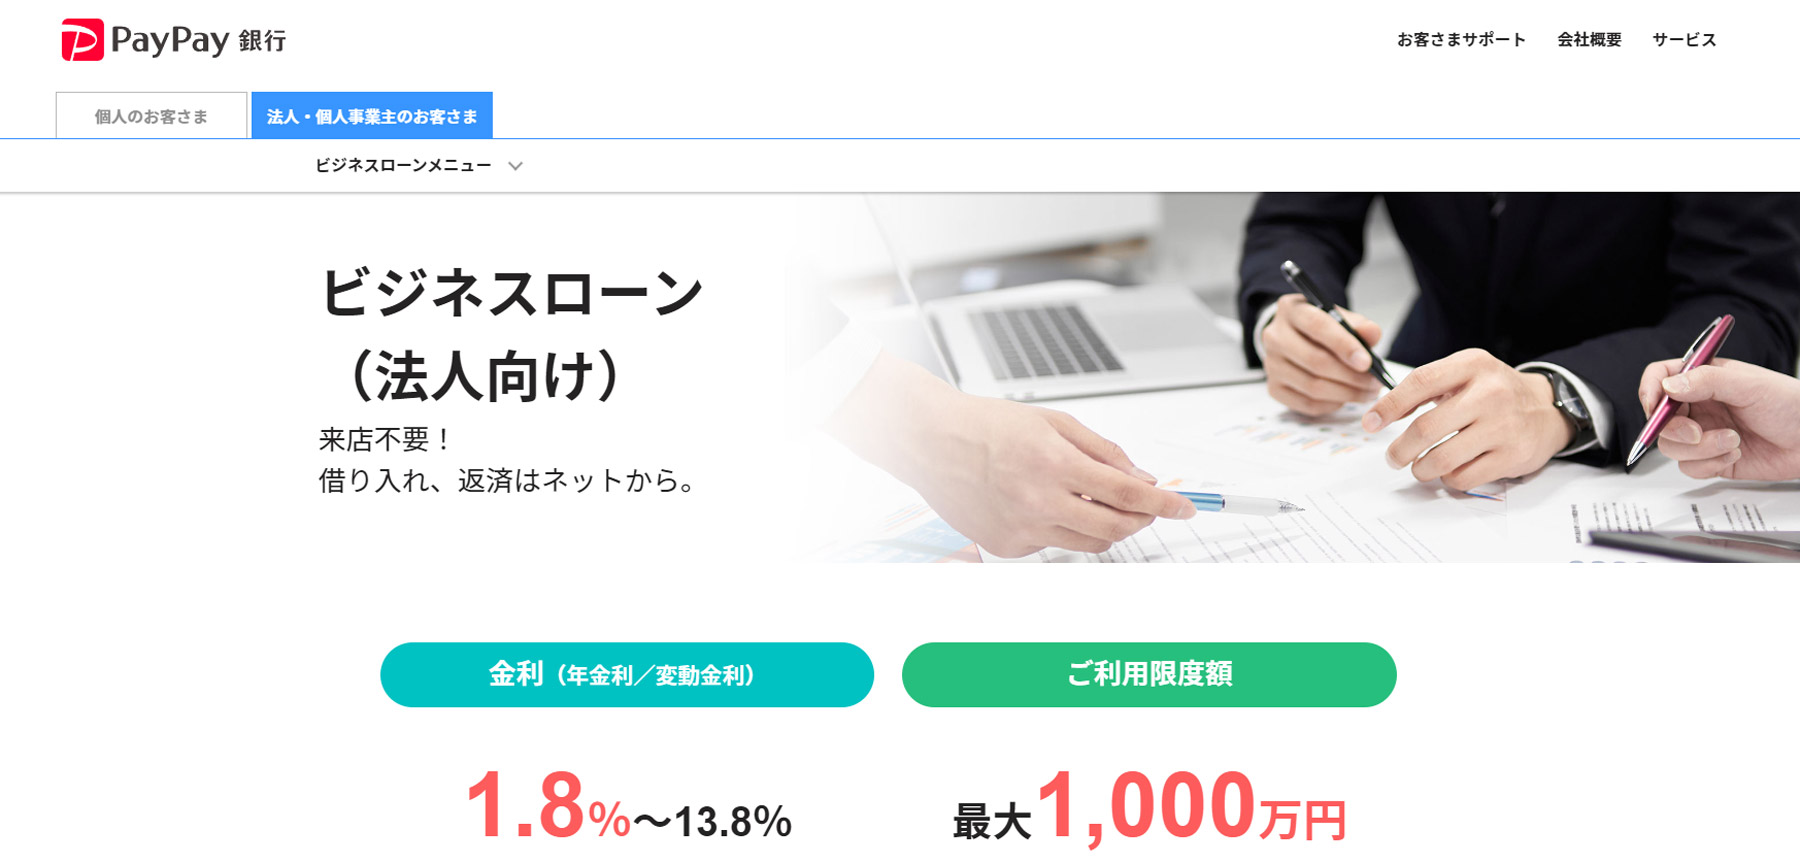 PayPay銀行 ビジネスローン公式Webサイト